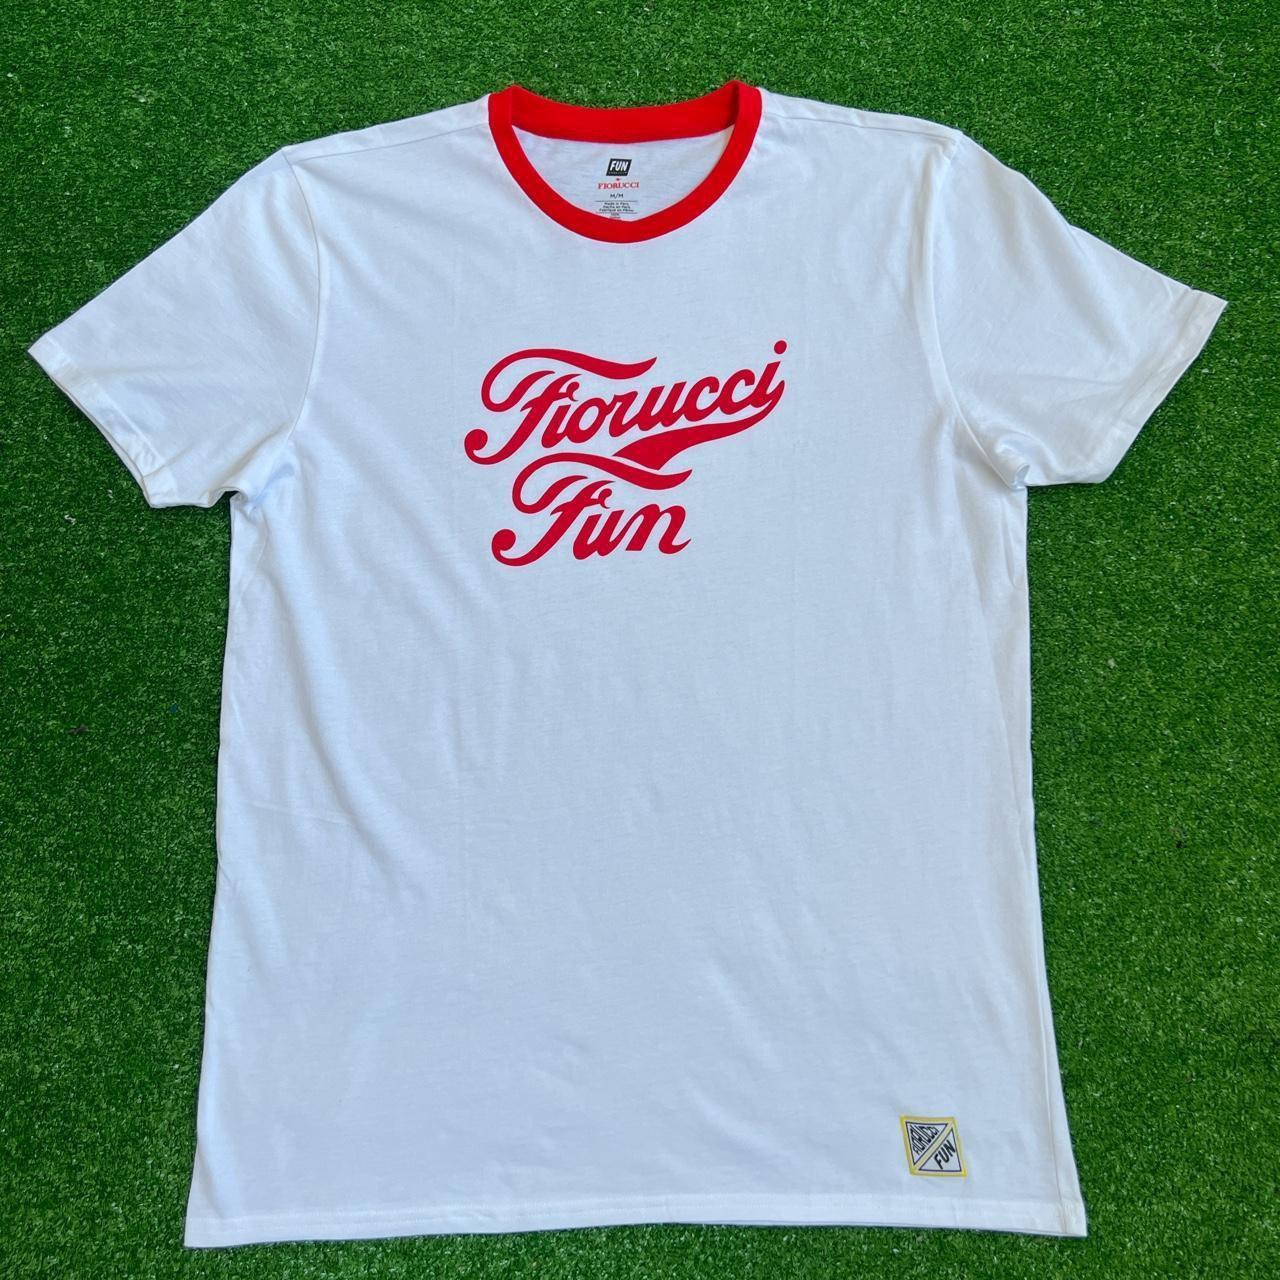 Fiorucci Men's White and Red T-shirt | Depop